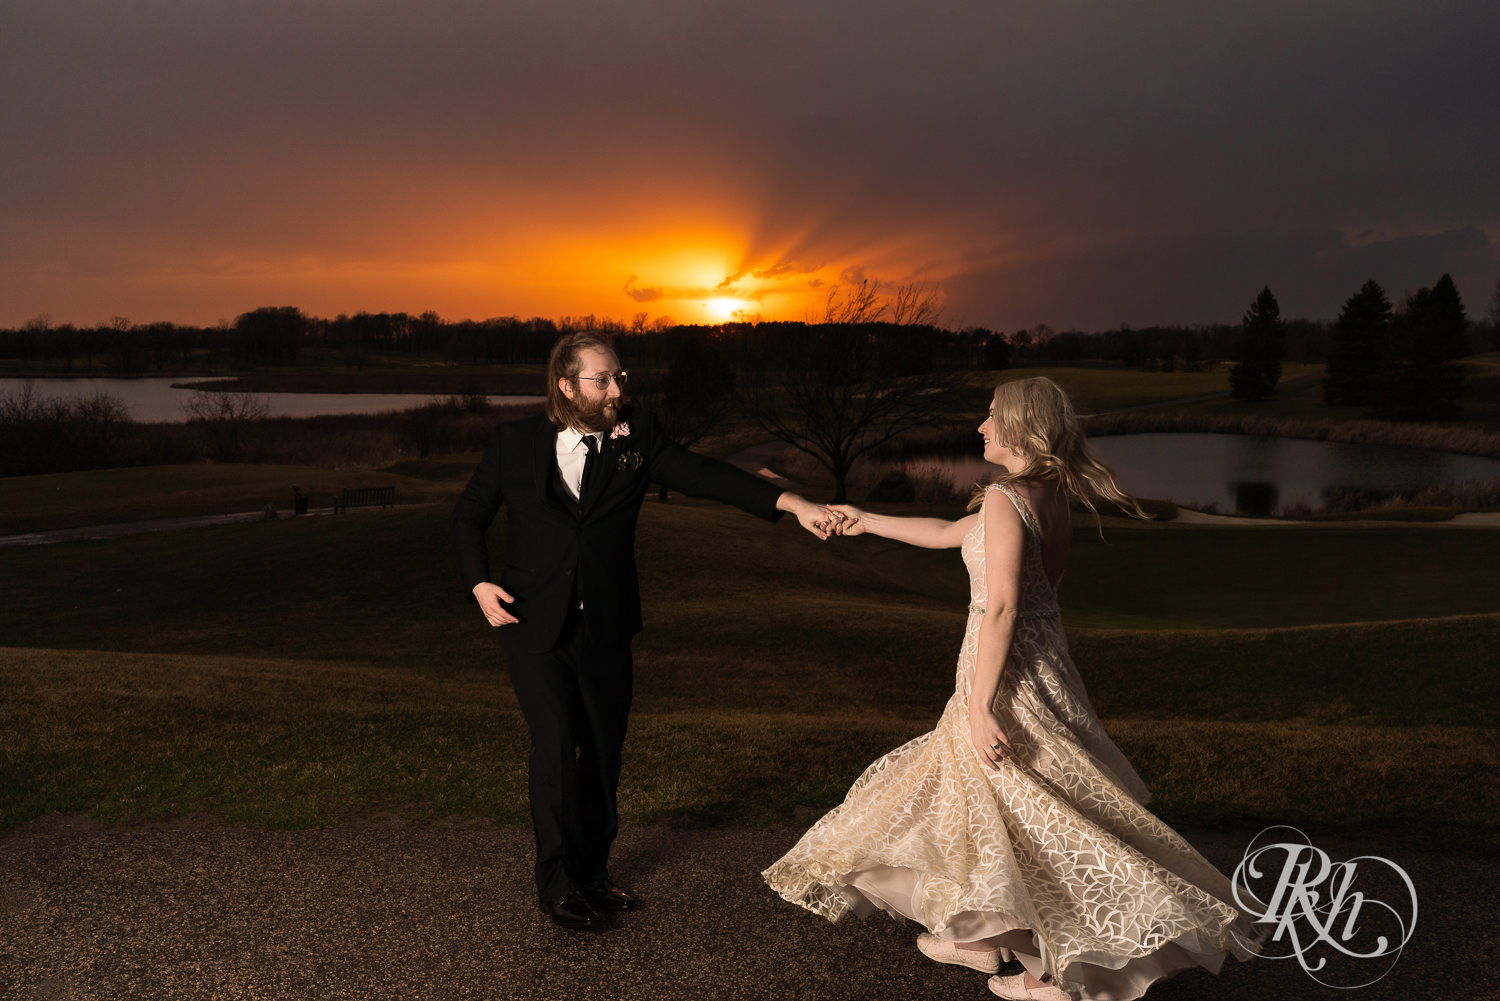 Bride and groom dance at sunset at Rush Creek Golf Club in Maple Grove, Minnesota.